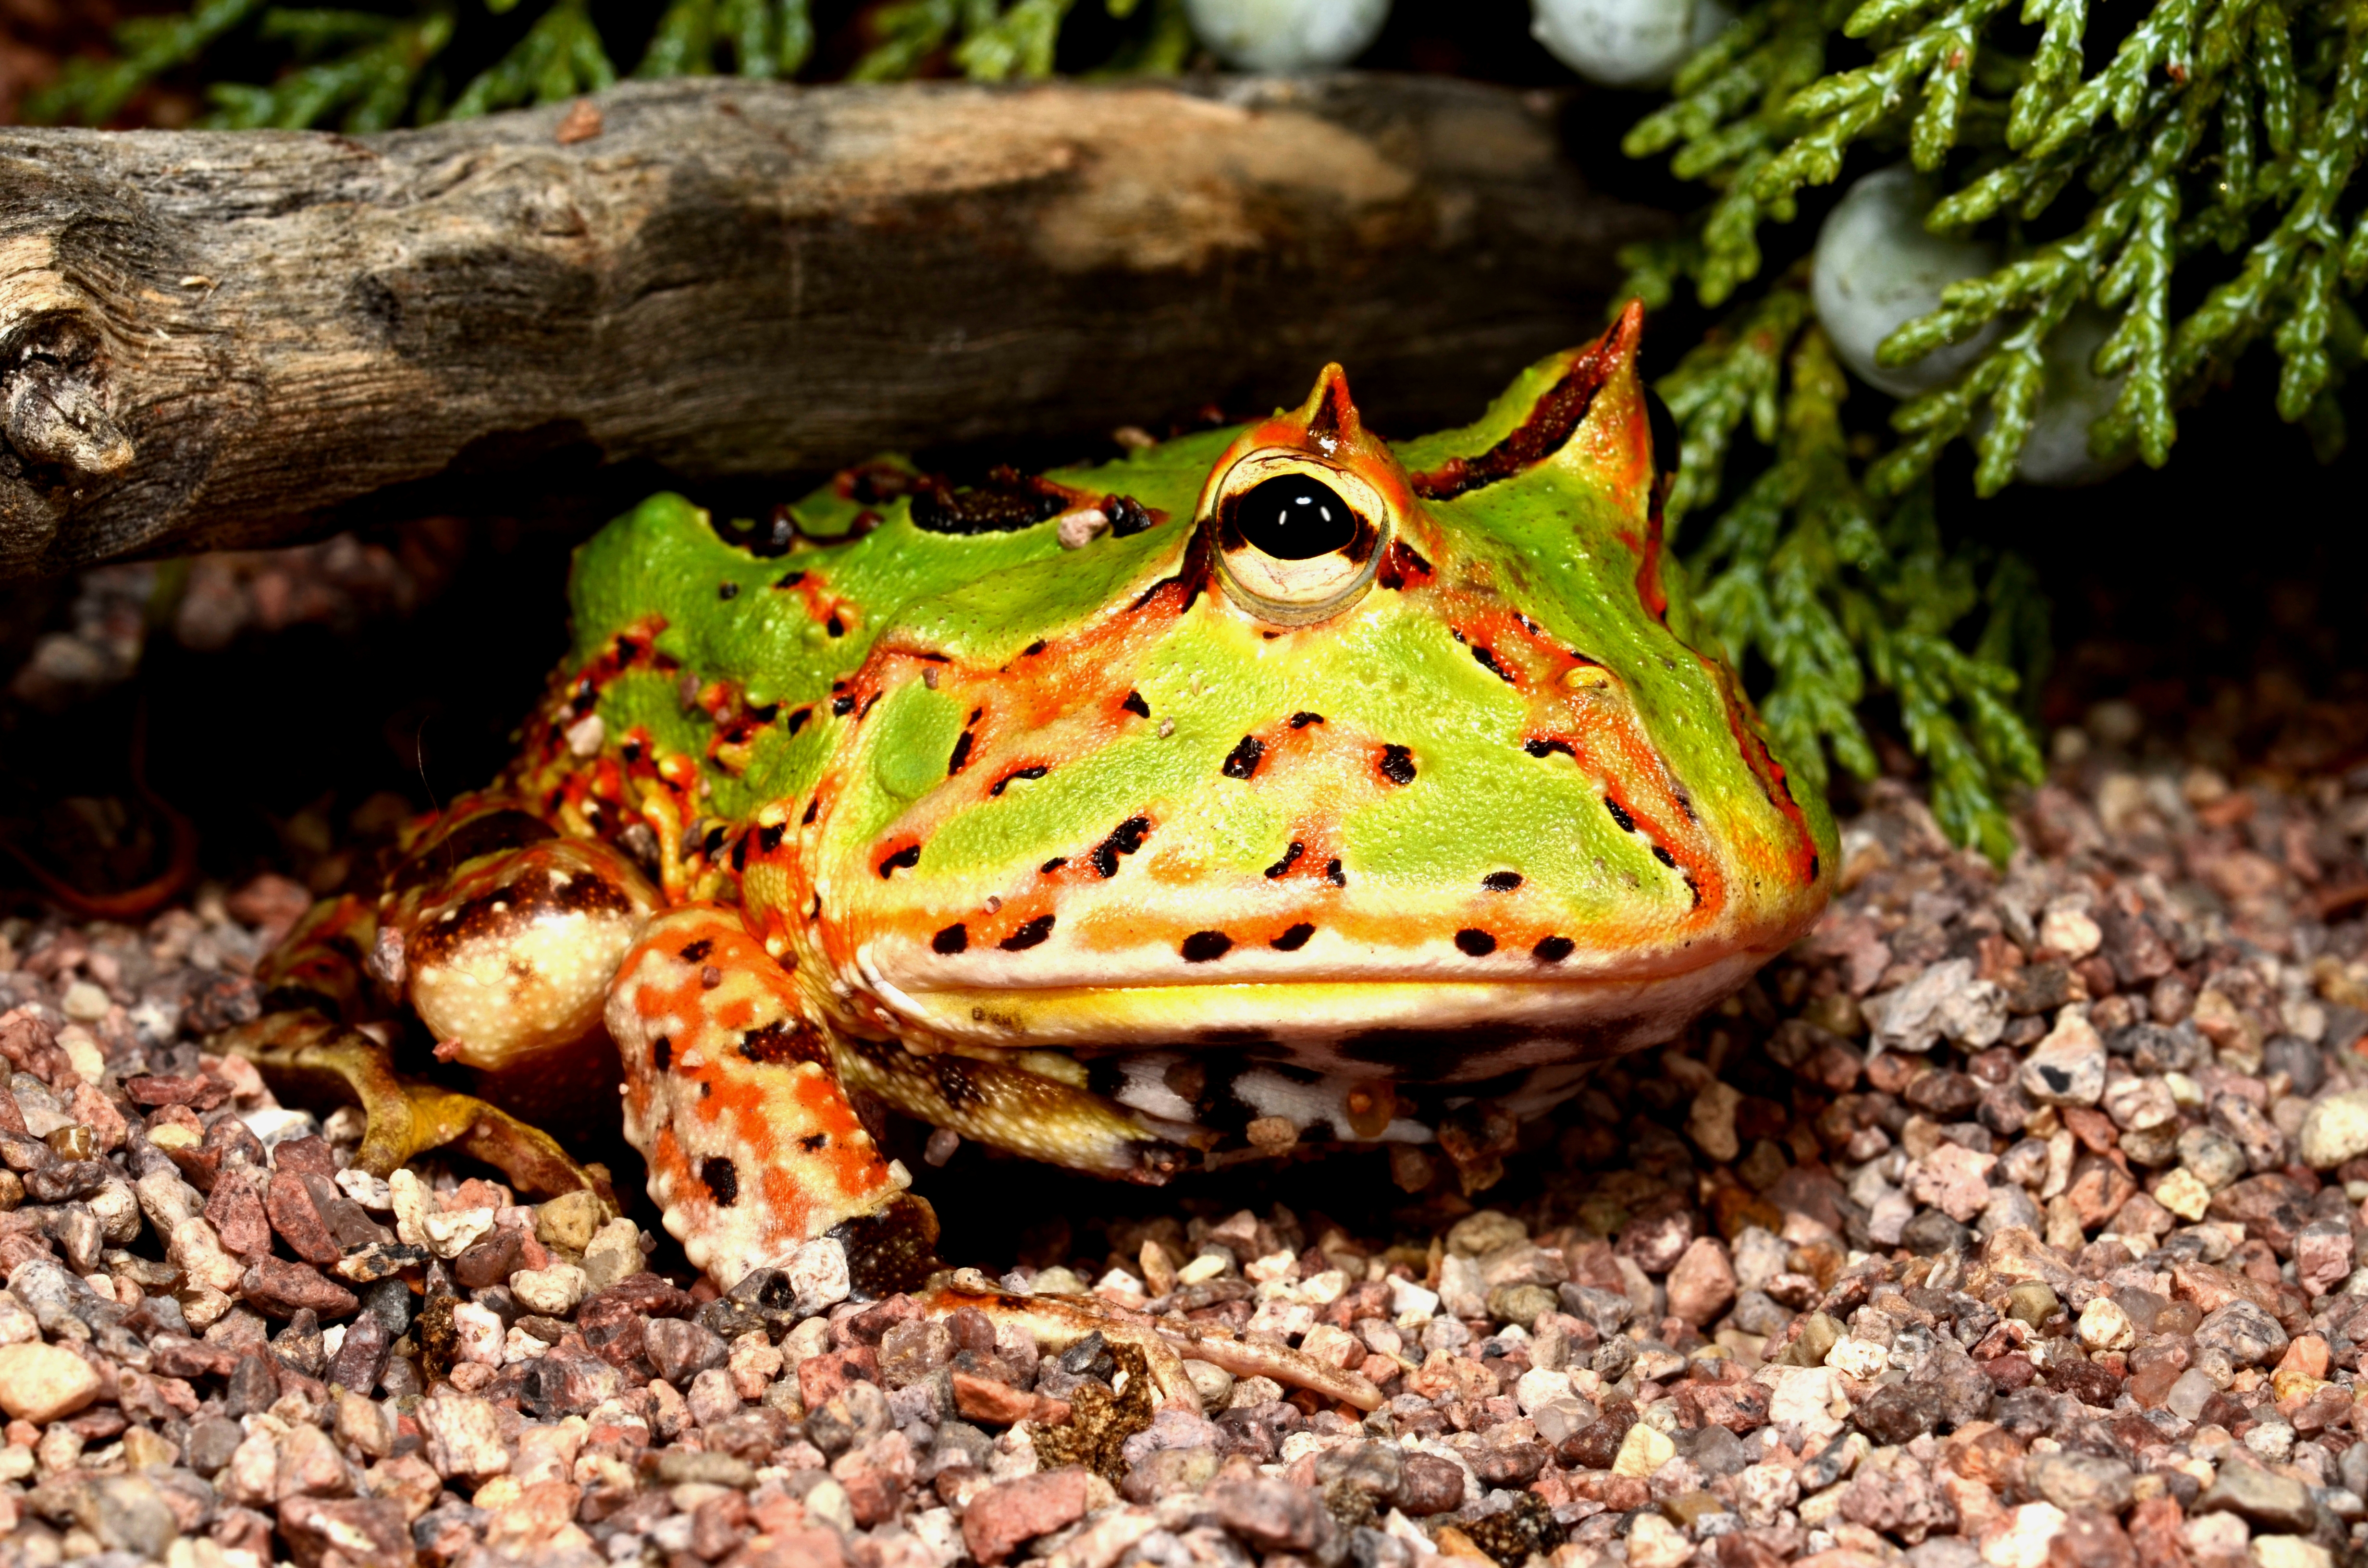 south american horned frog (ceratophrys) sitting on small rocks under a log